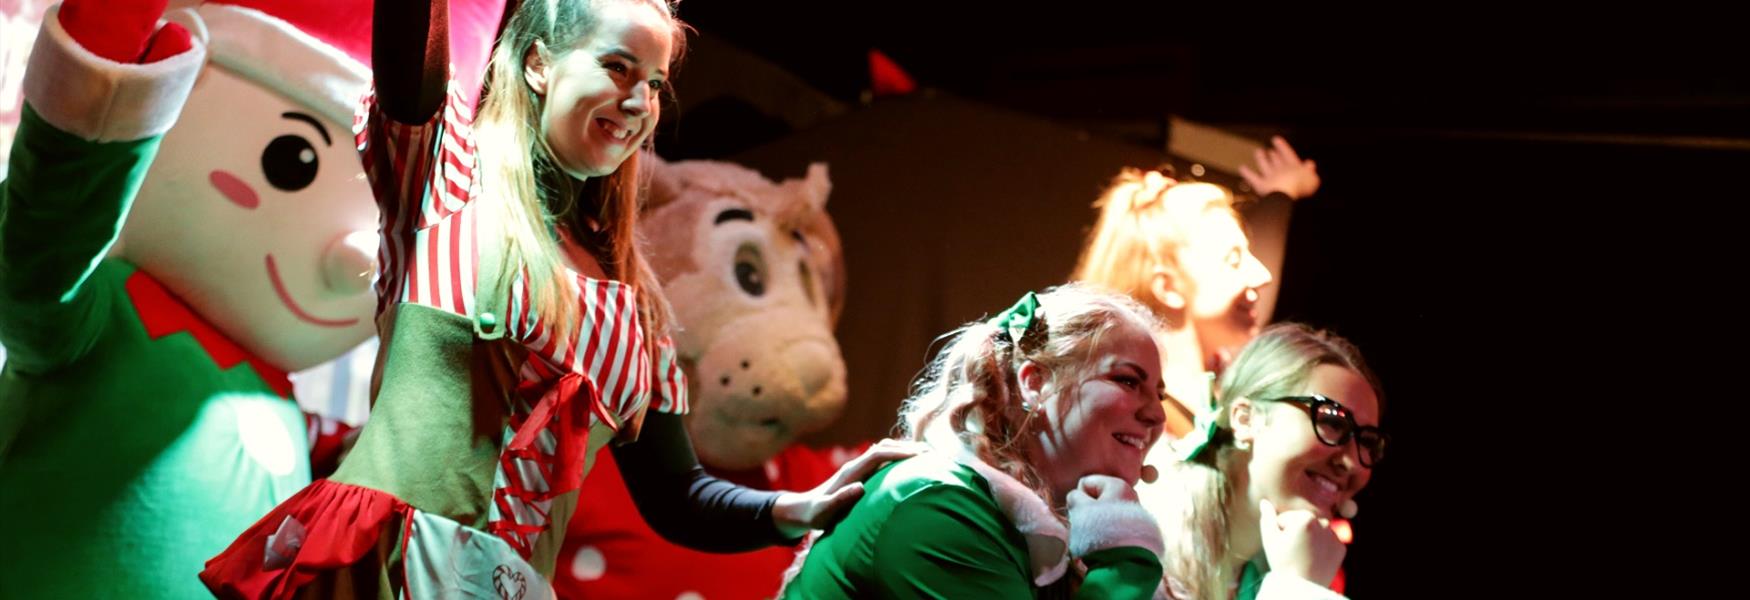 Pantomimes and Christmas Performances Visit Cheshire